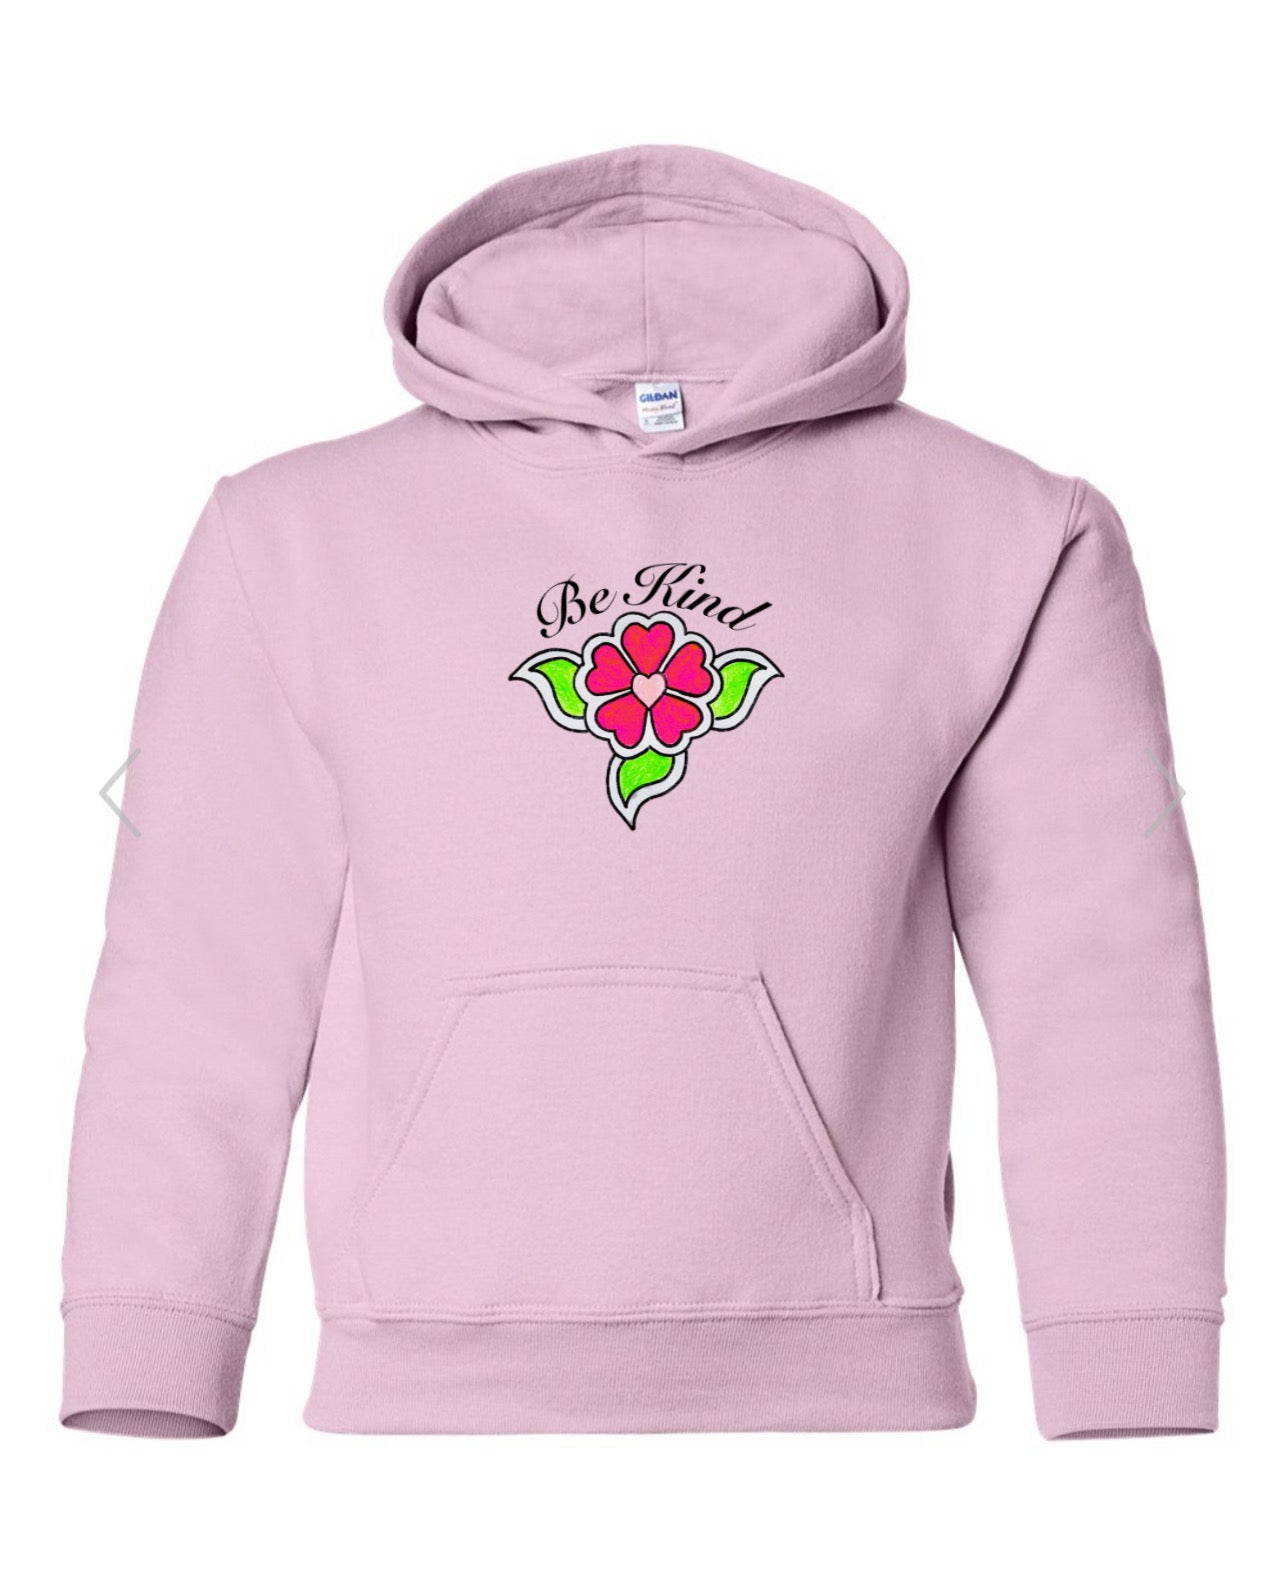 “Be Kind” Youth Pink Pull Over